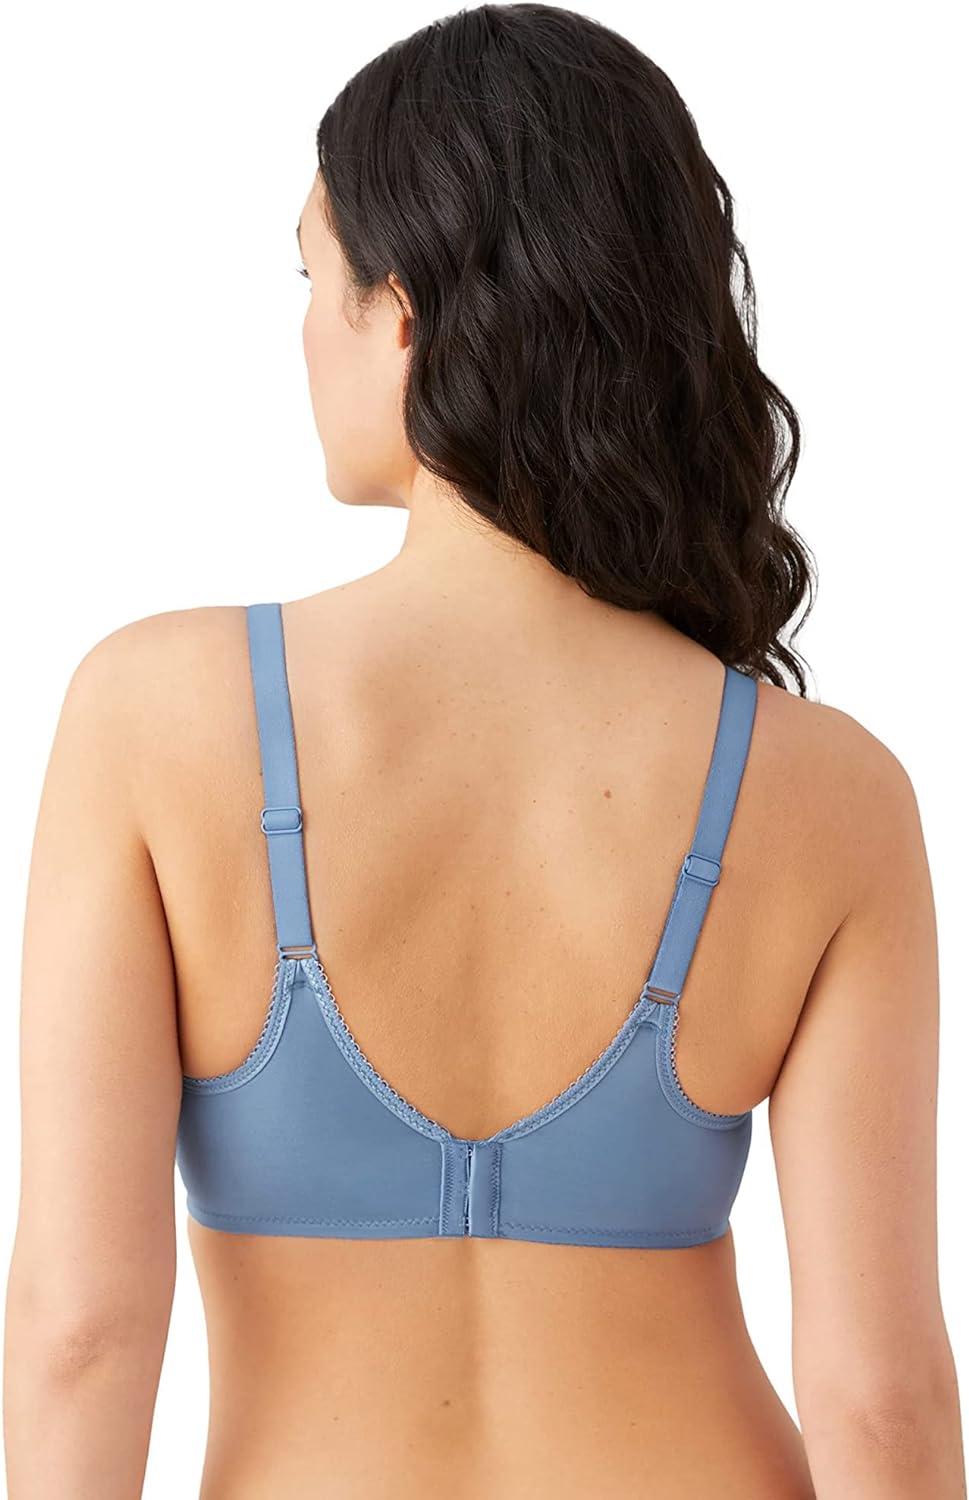 Wacoal: The Most Comfortable T-Shirt Bra Around - Up to G Cup